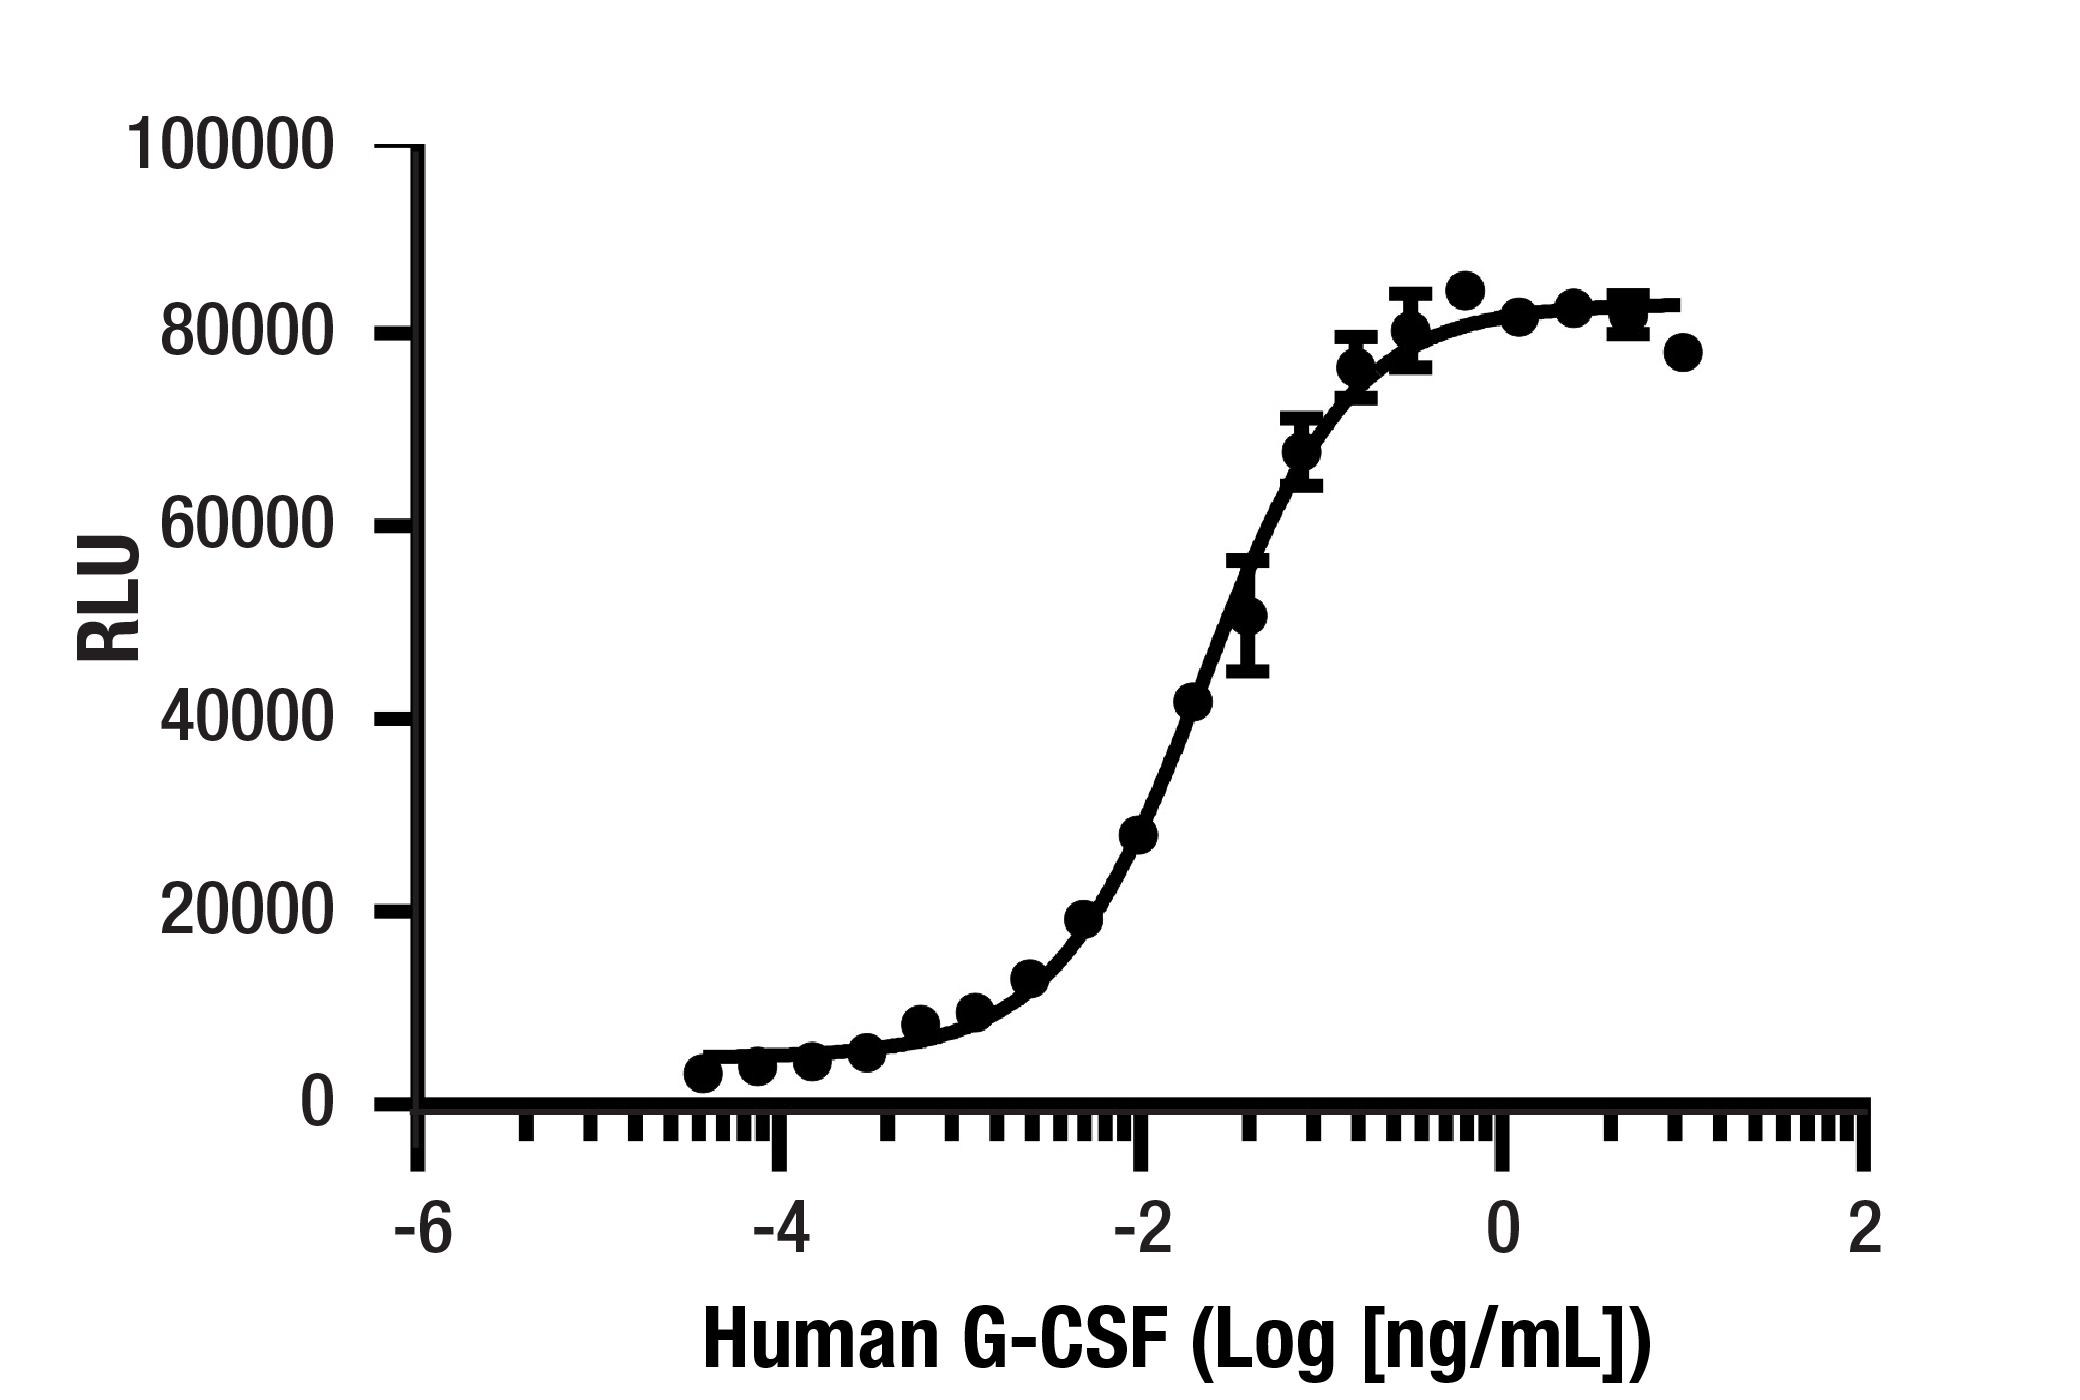  Image 2: Human G-CSF Recombinant Protein